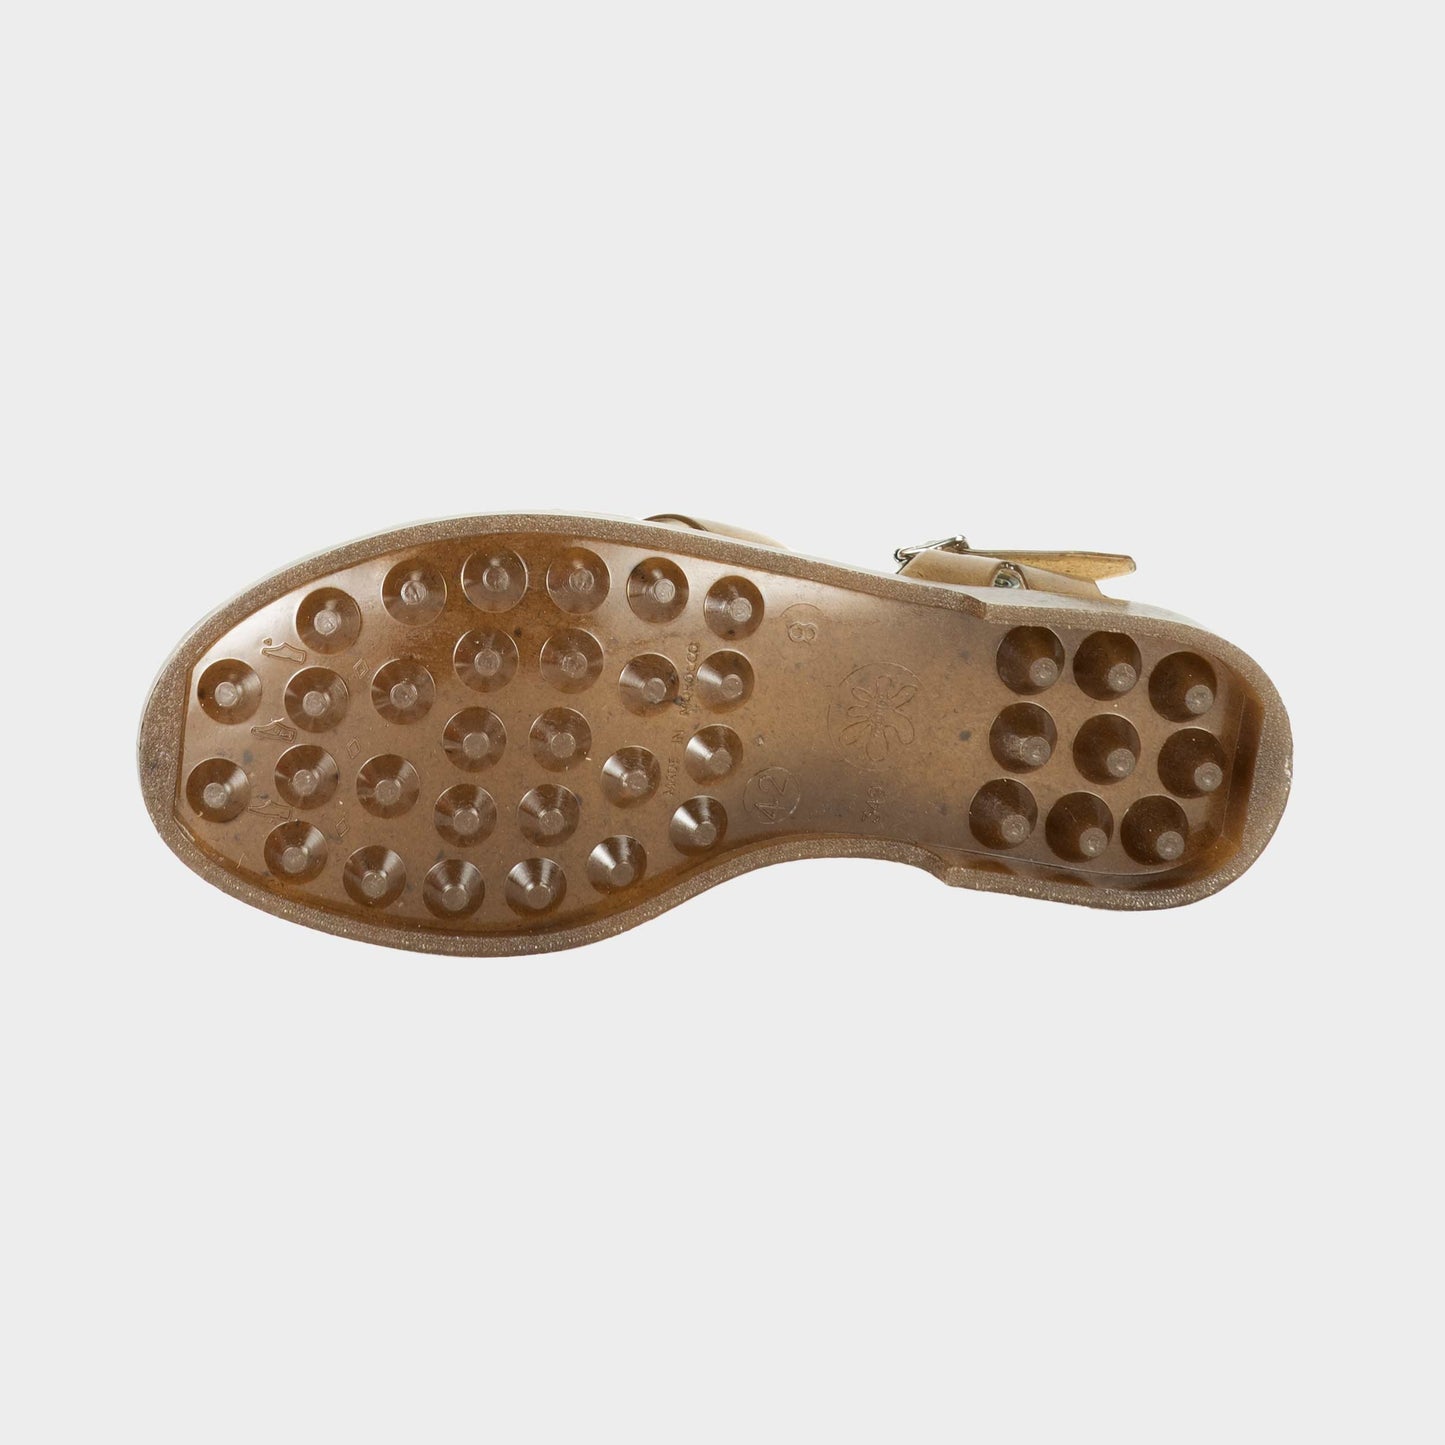 French Recycled Hemp Fisherman Sandals in Sepia